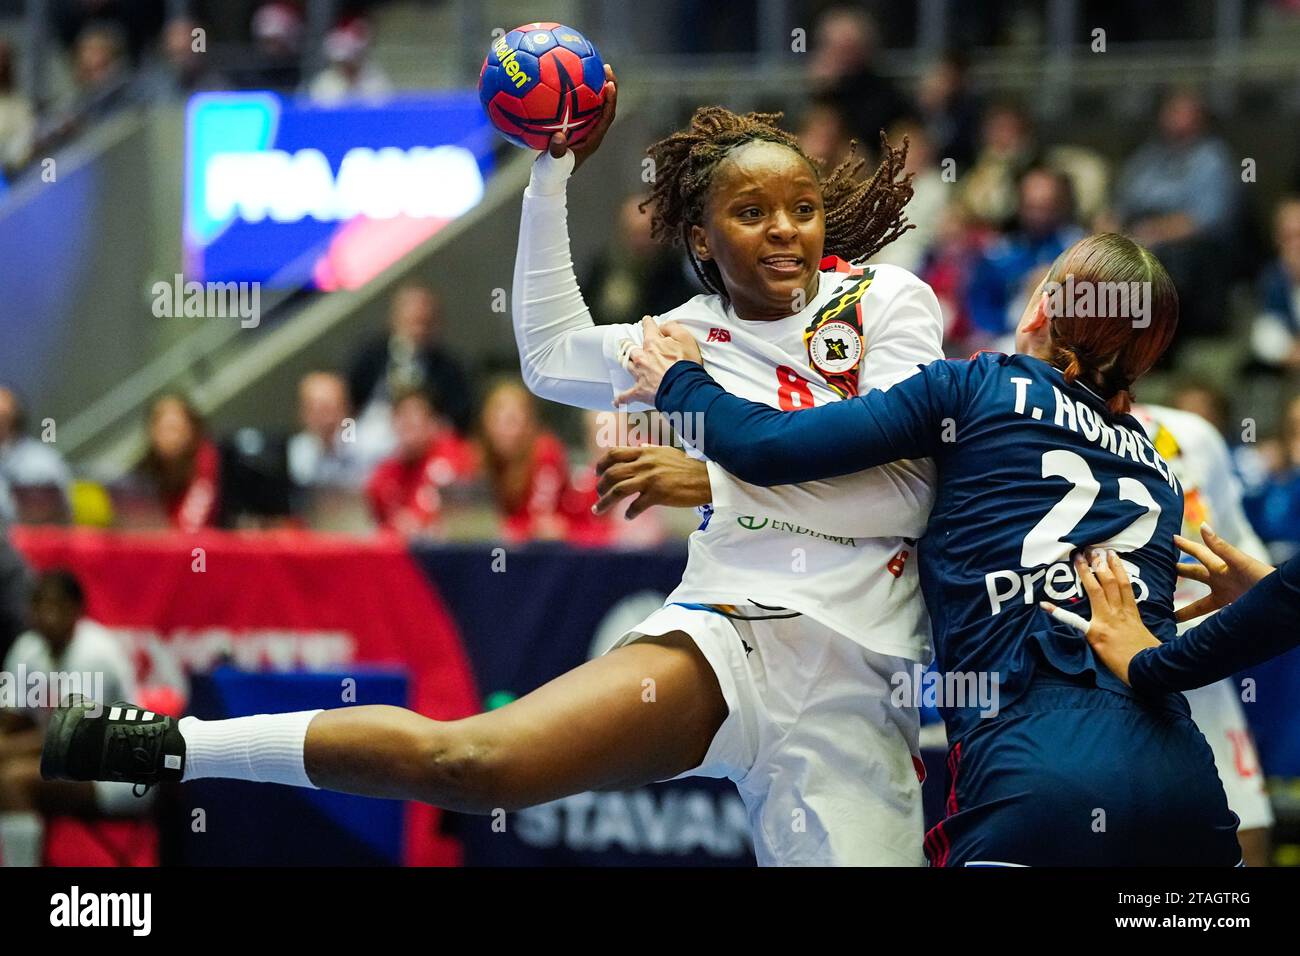 Stavanger 20231130.Angola's Helena Paulo during the World Championship group stage match between France and Angola in the DNB Arena. Photo: Beate Oma Dahle / NTB Stock Photo